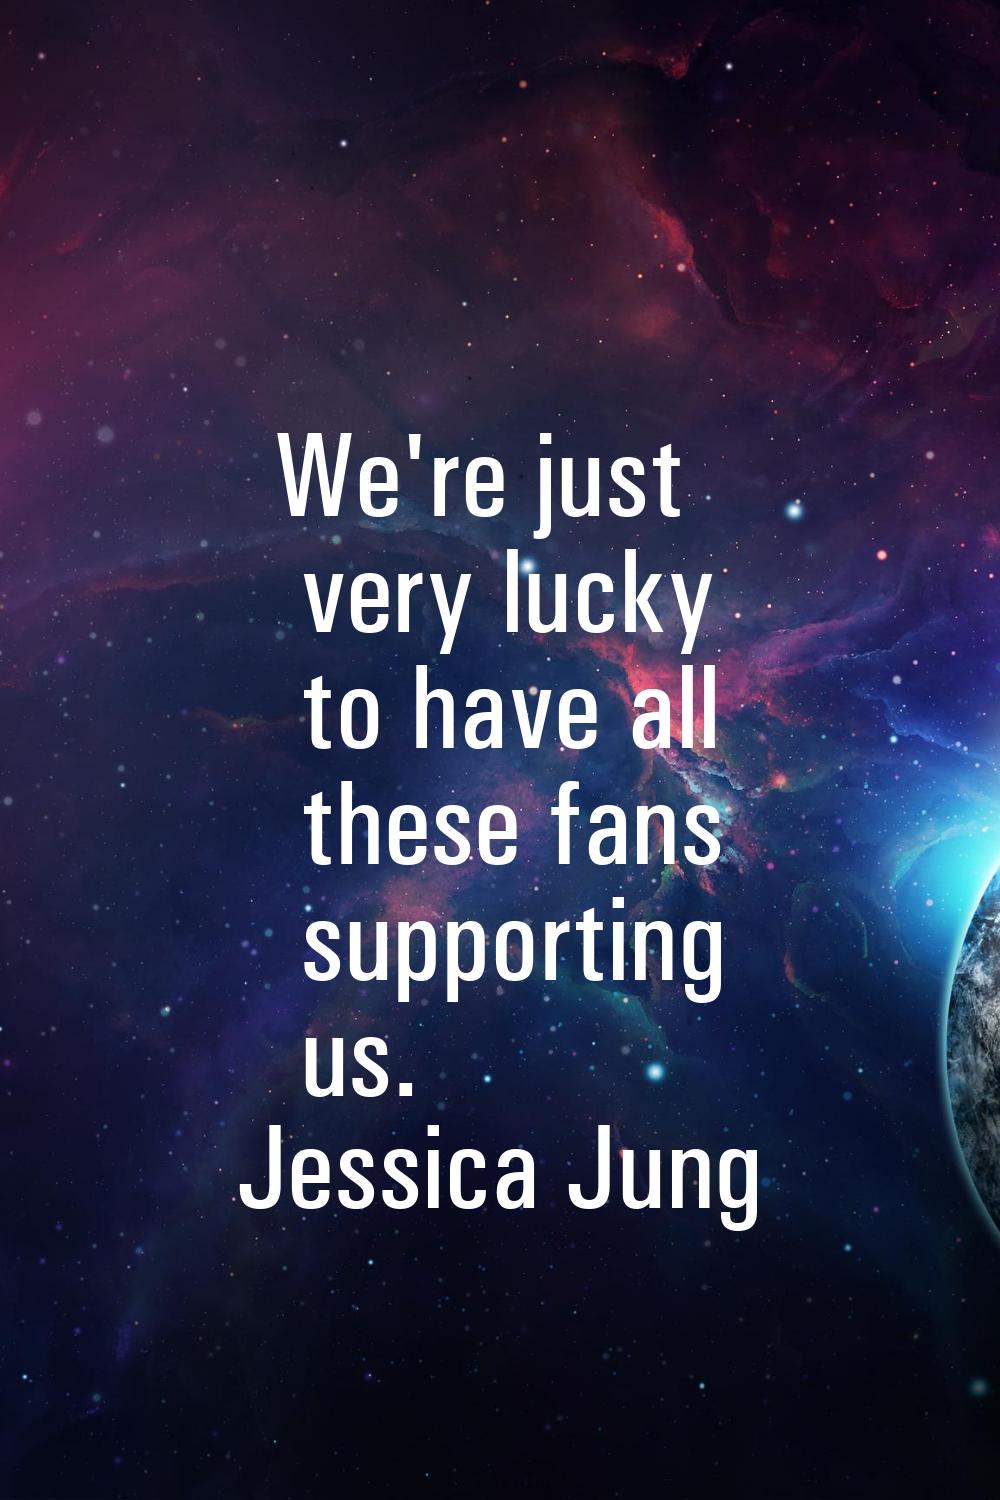 We're just very lucky to have all these fans supporting us.